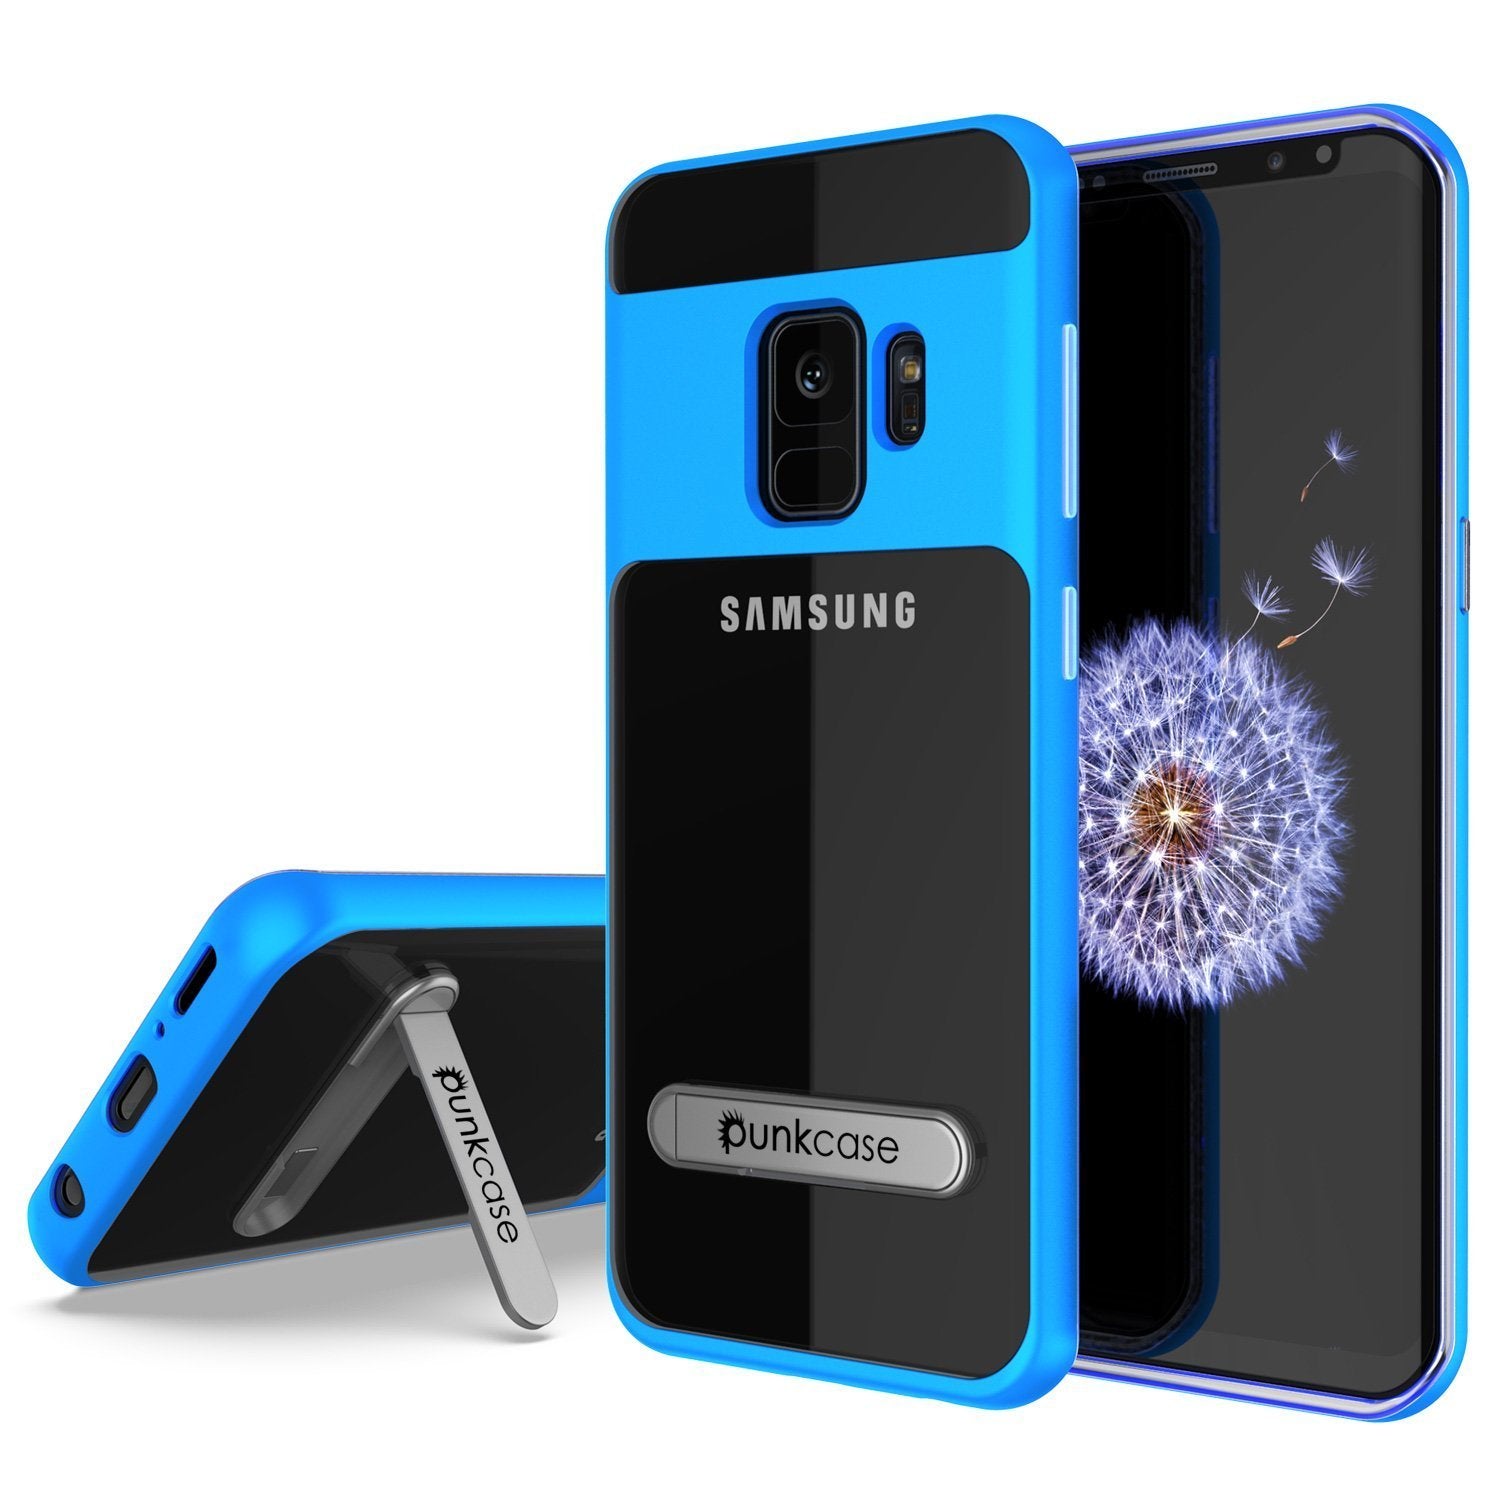 Galaxy S9 Punkcase, LUCID 3.0 Series Cover w/Kickstand, [Blue]